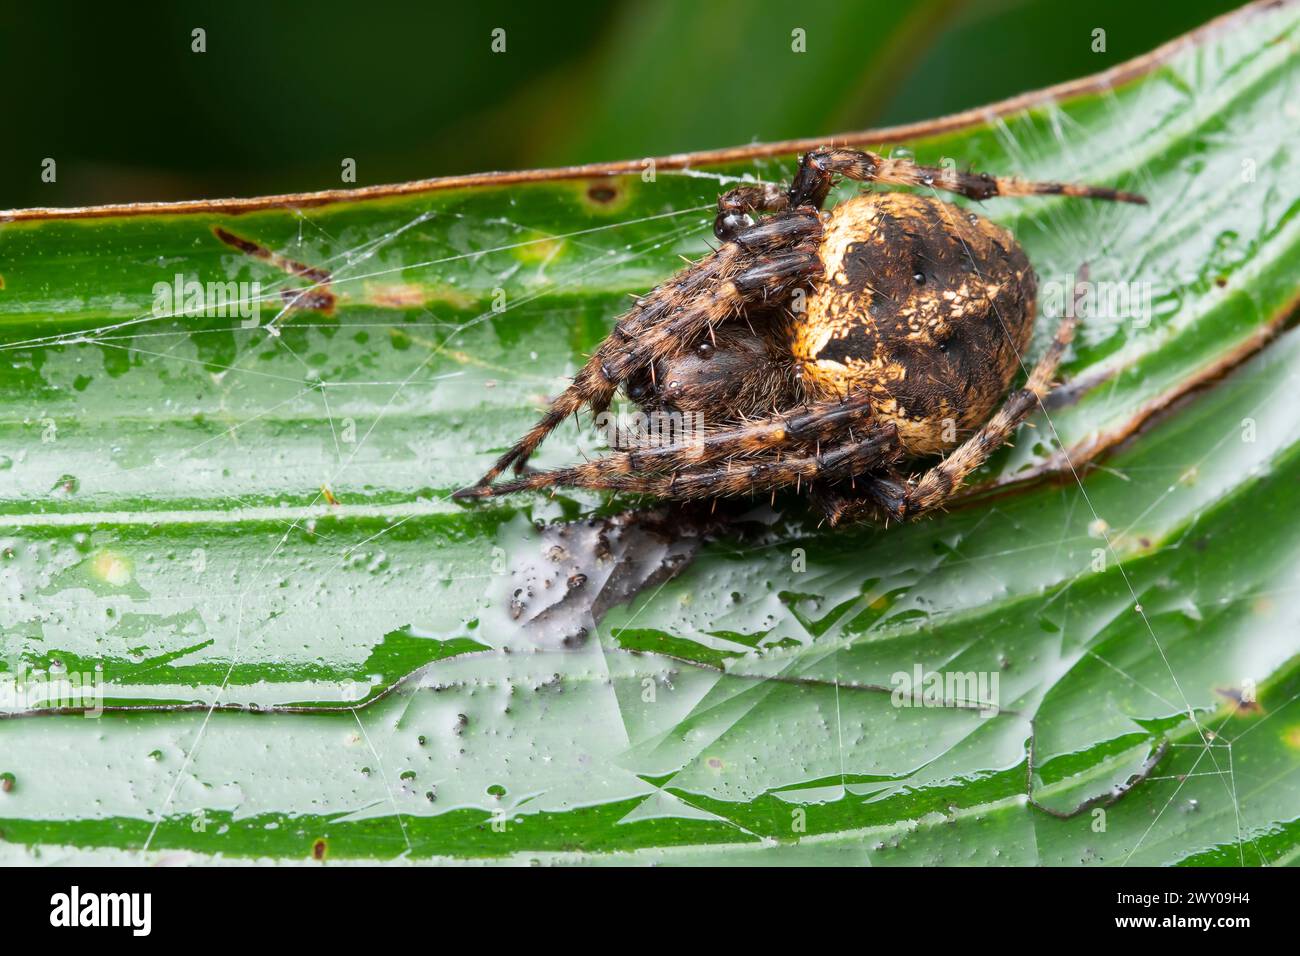 A Neoscona vigilans spider entwined in a web on a green leaf with morning dew Stock Photo